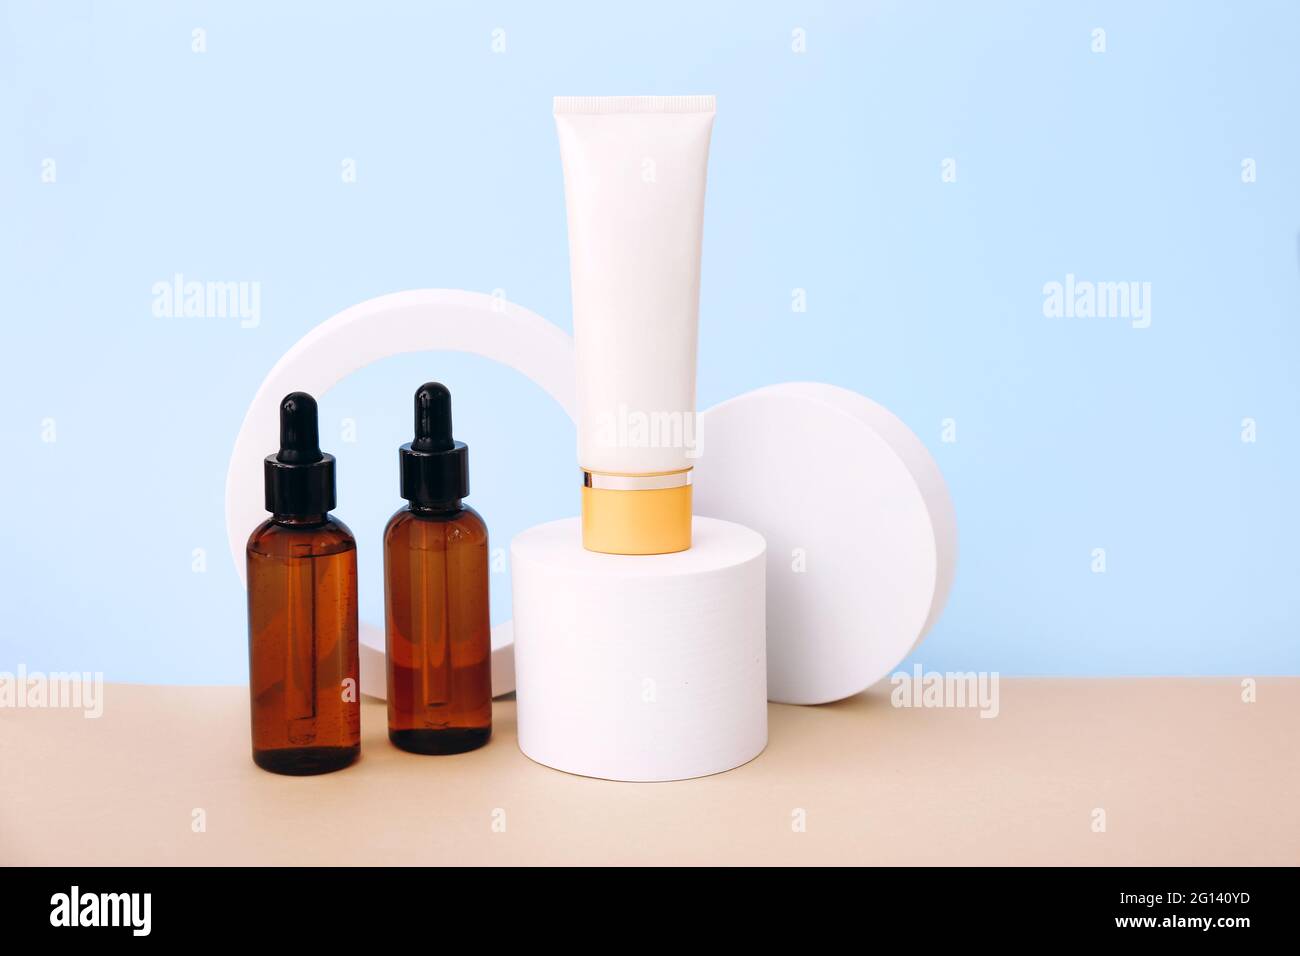 Cosmetic bottles on the geometric podiums. Presentation template for natural beauty products on beige background Stock Photo